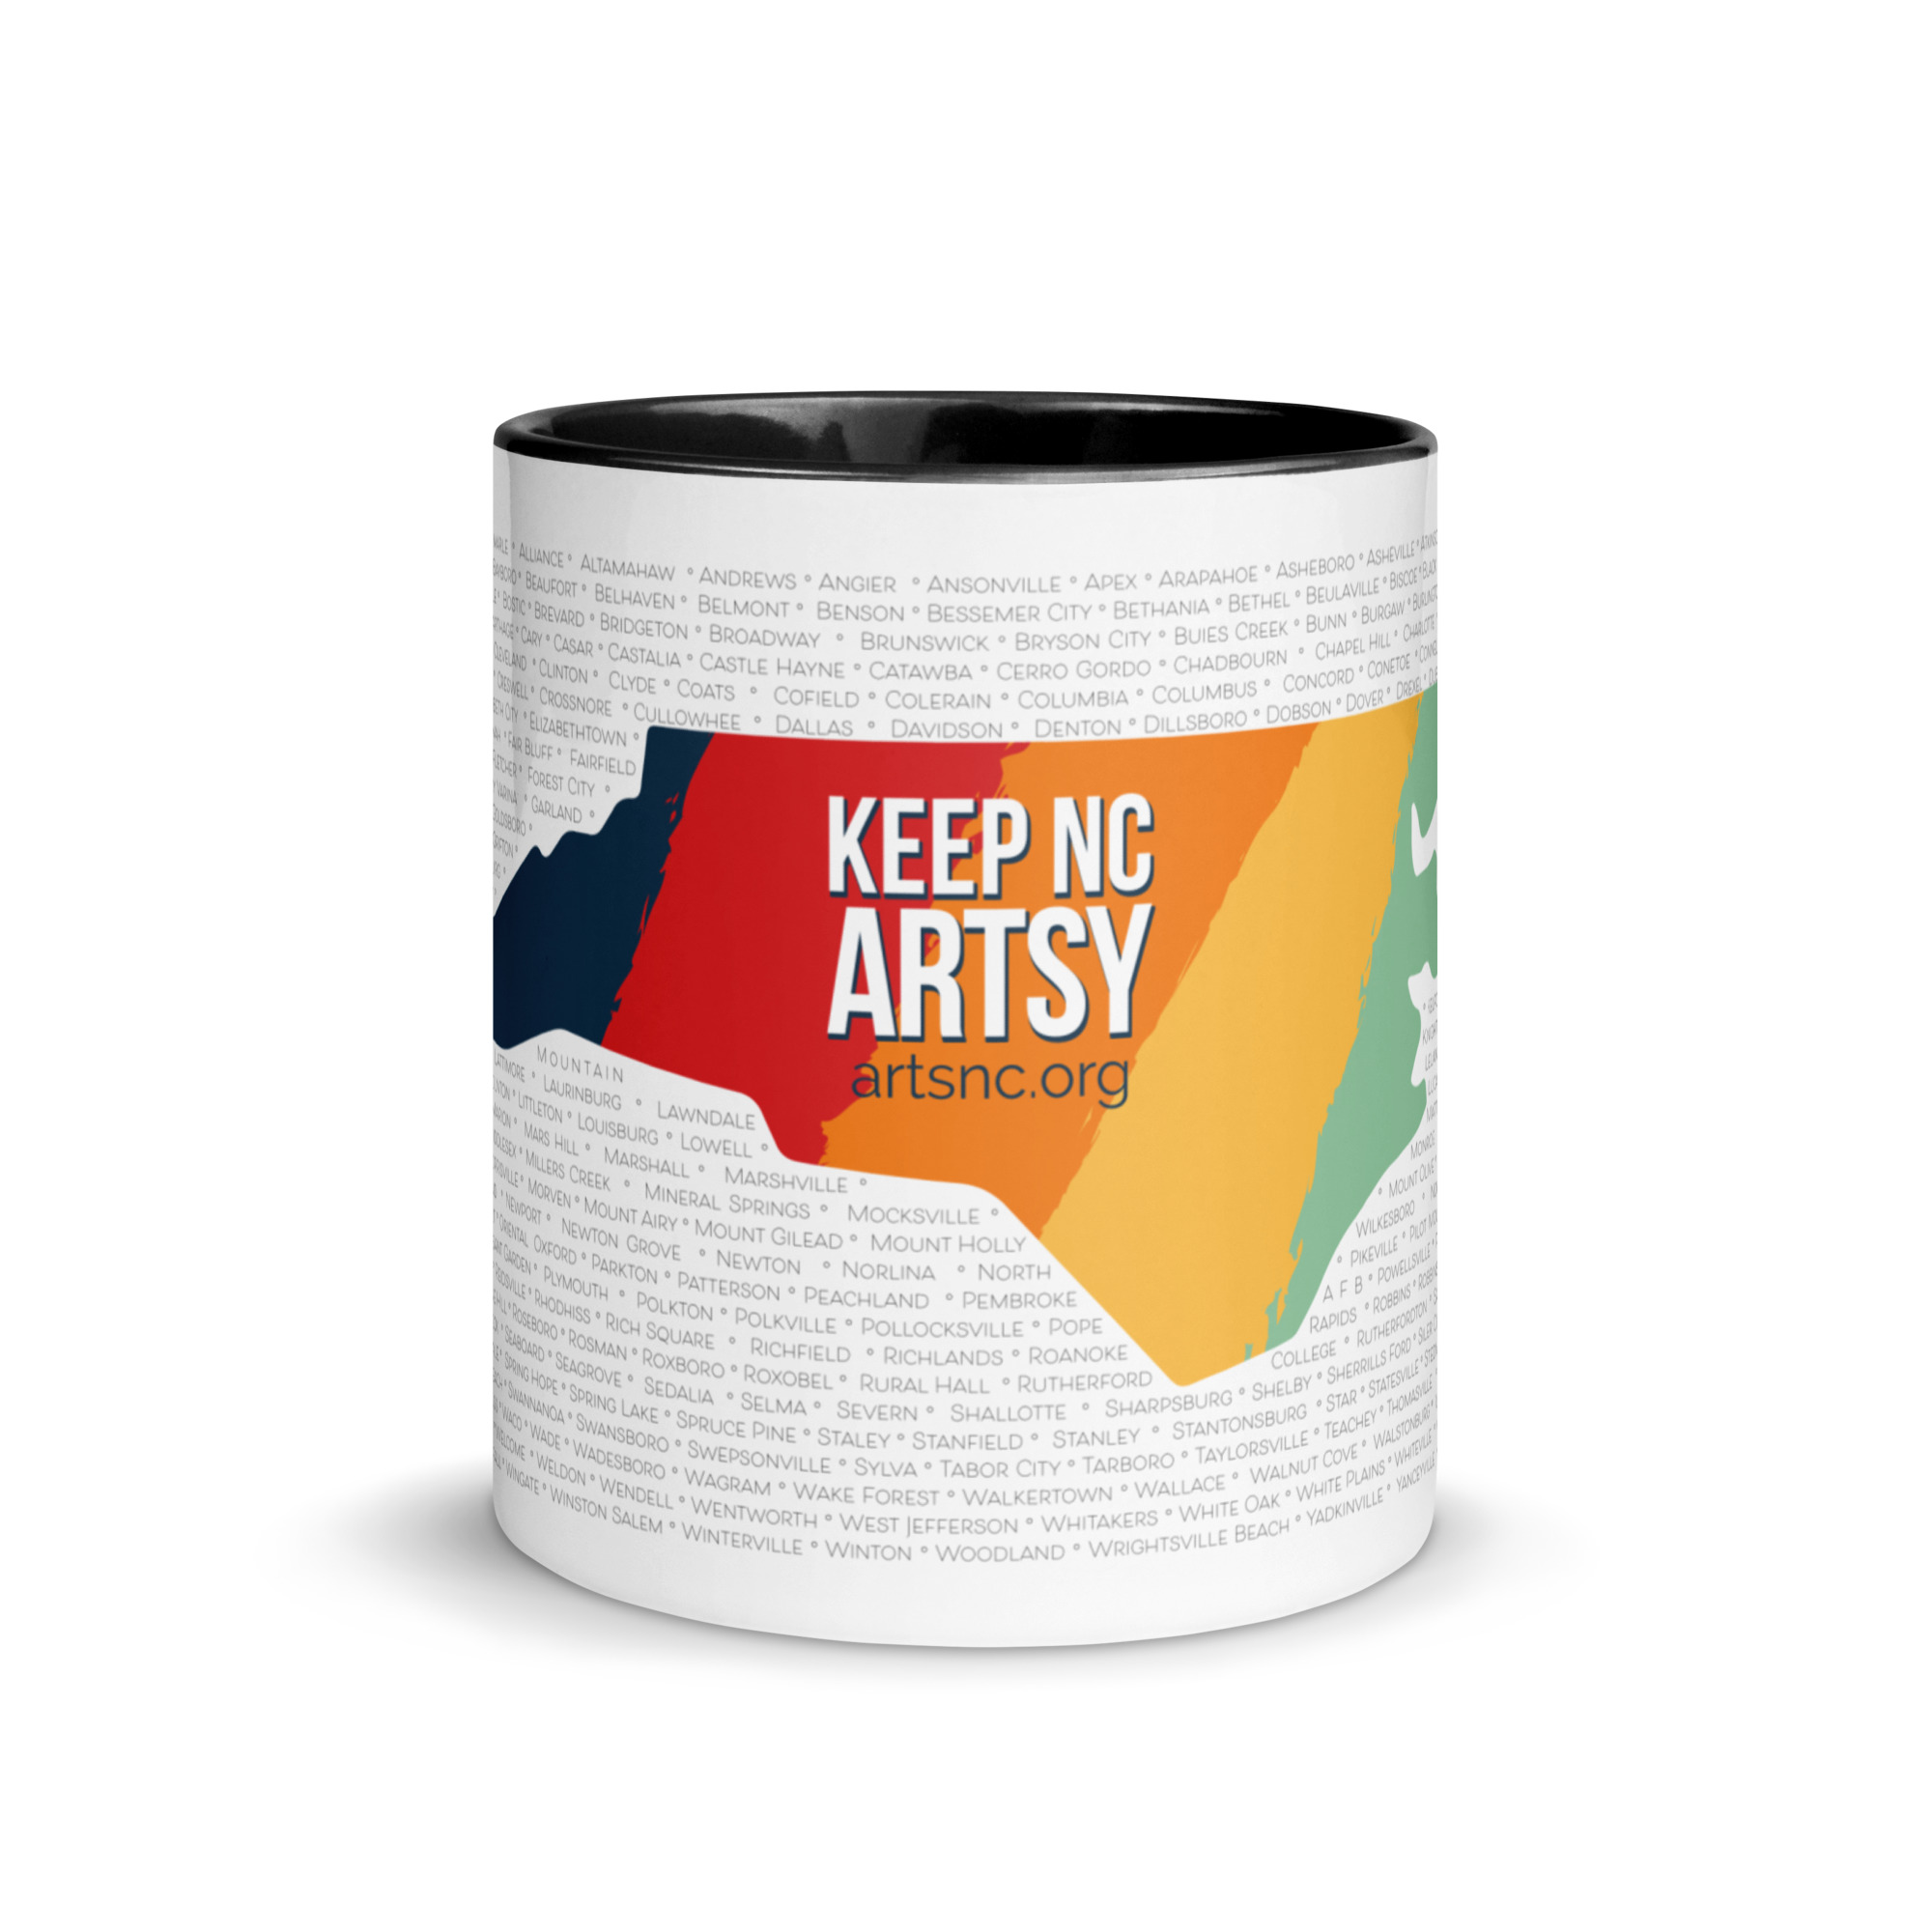 A white mug with black inside and a black handle. The outside of the mug is printed with NC state shape that has five vertical stripes - blue, red, orange, yellow and light green. Text in the center says "Keep NC Artsy". In the background are rows of NC county and city names.